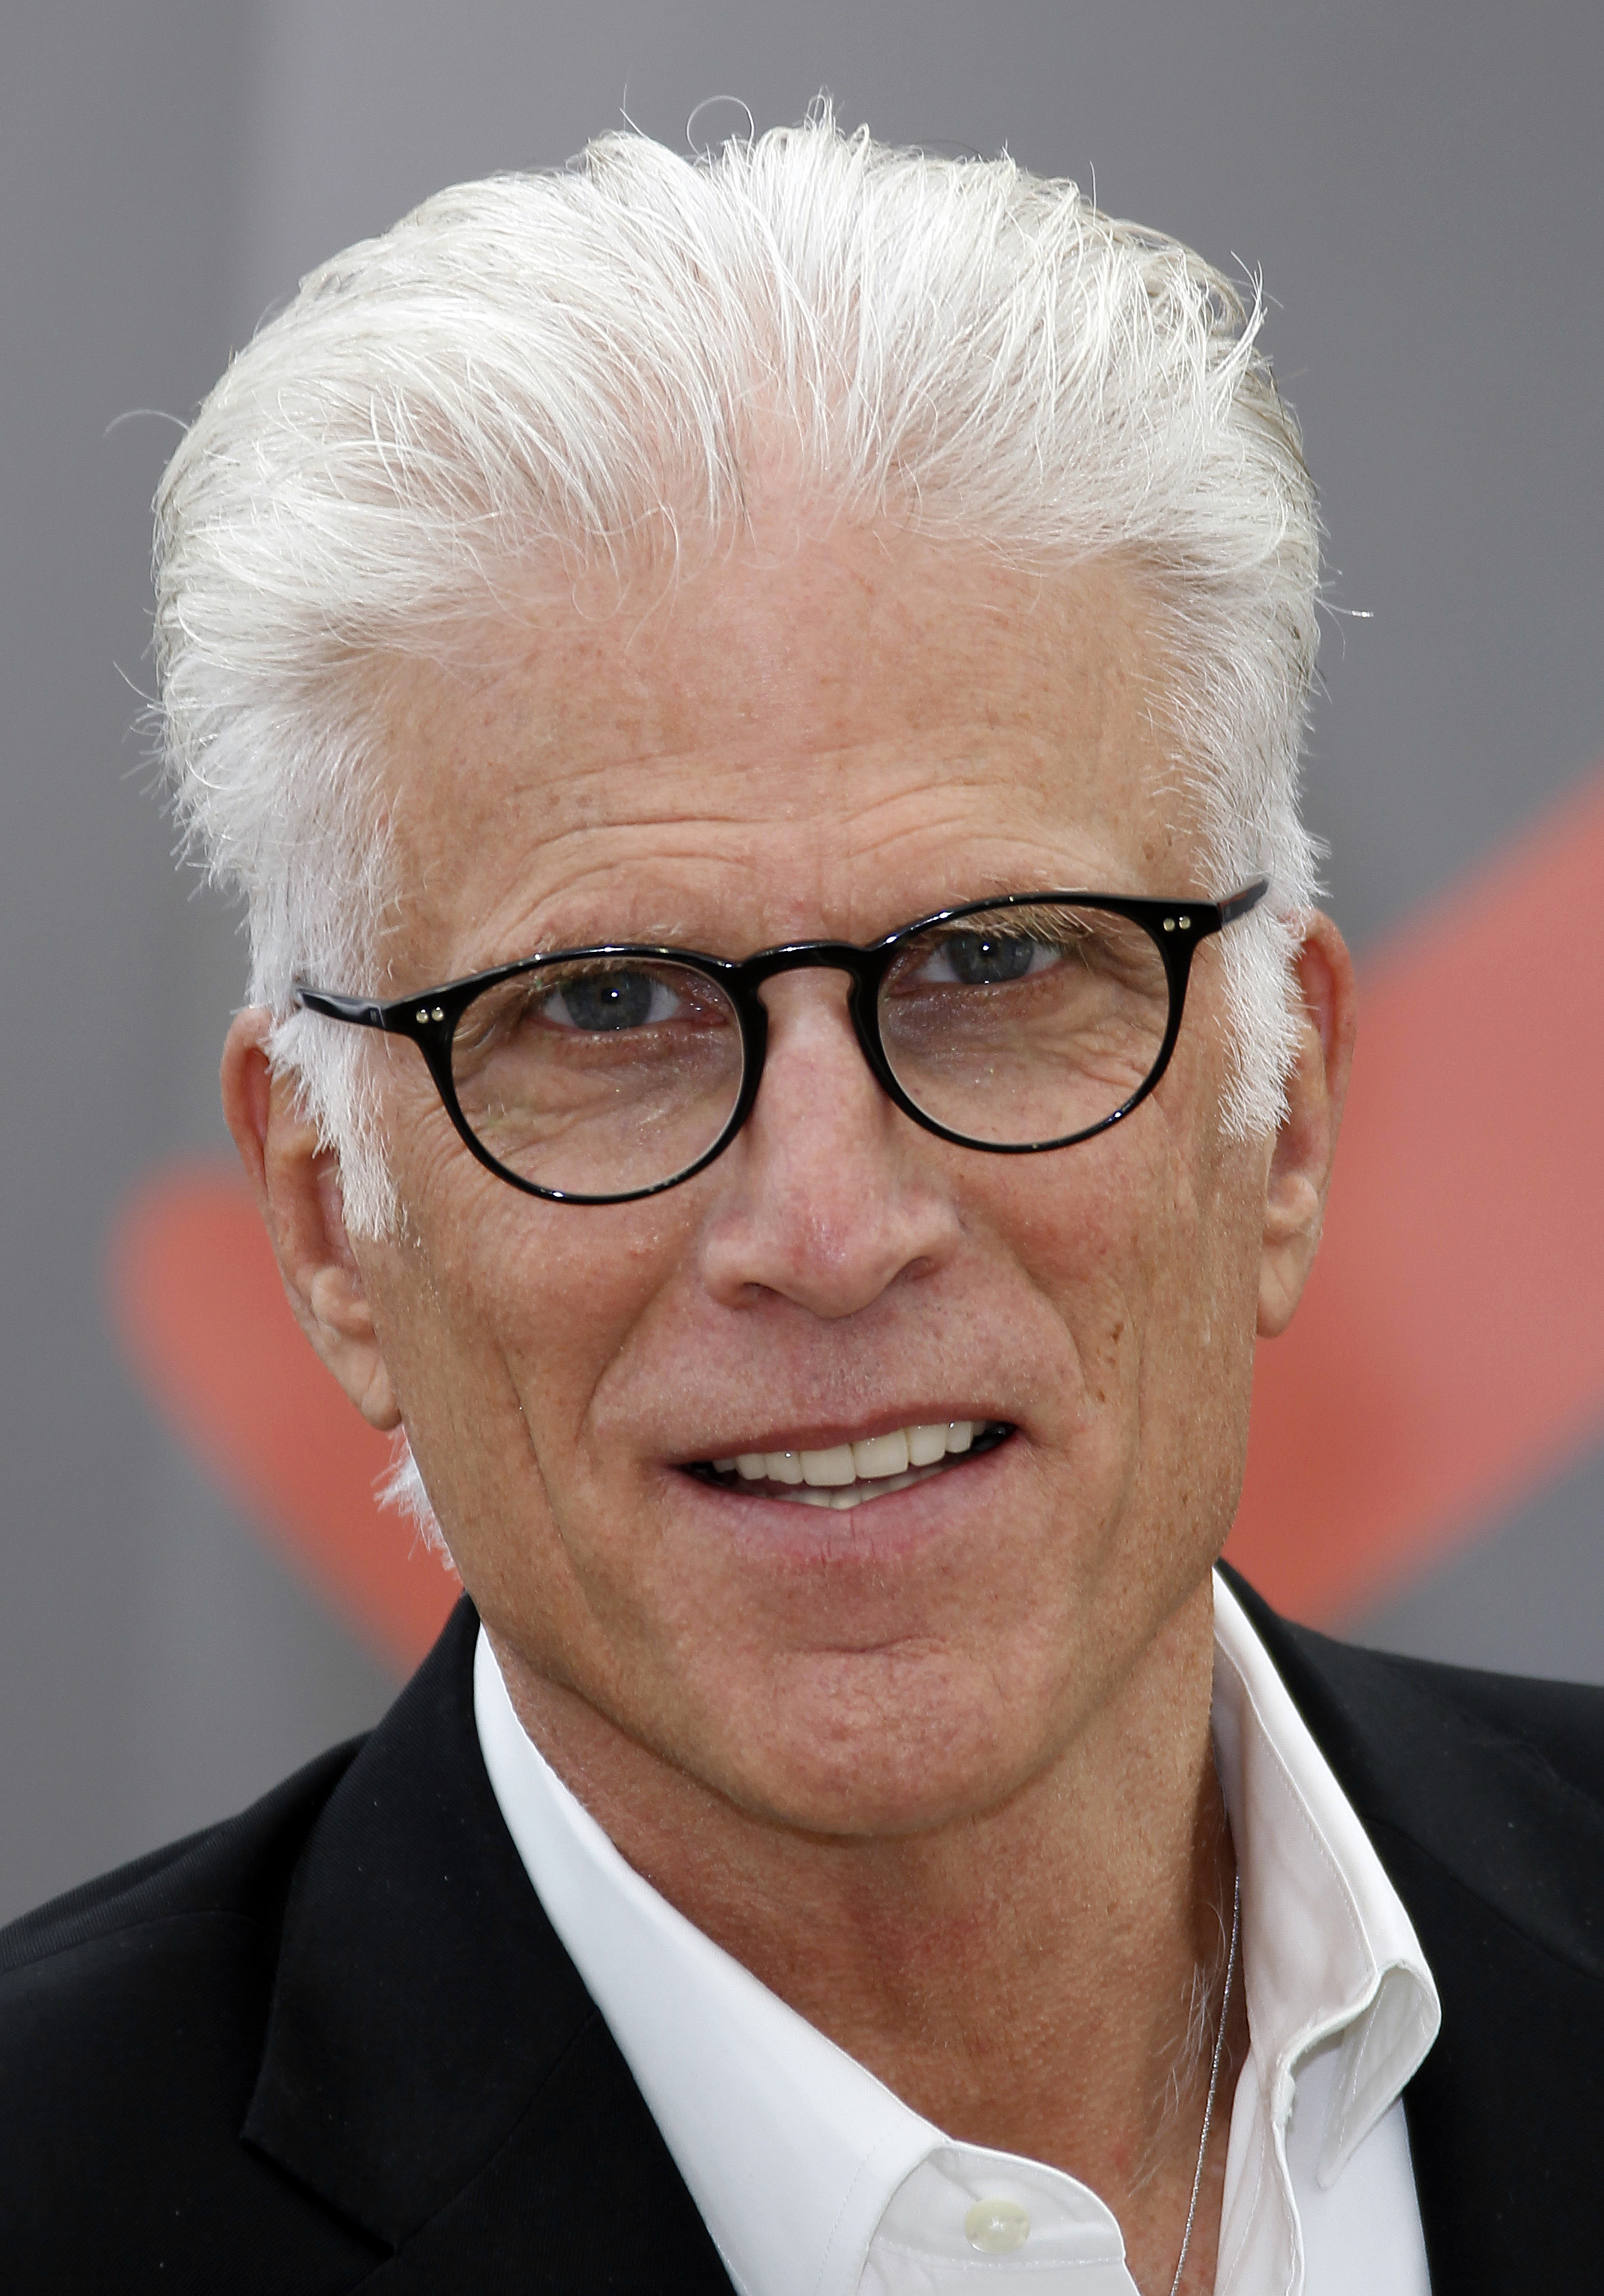 More Pictures Of Ted Danson. ted danson pictures. 